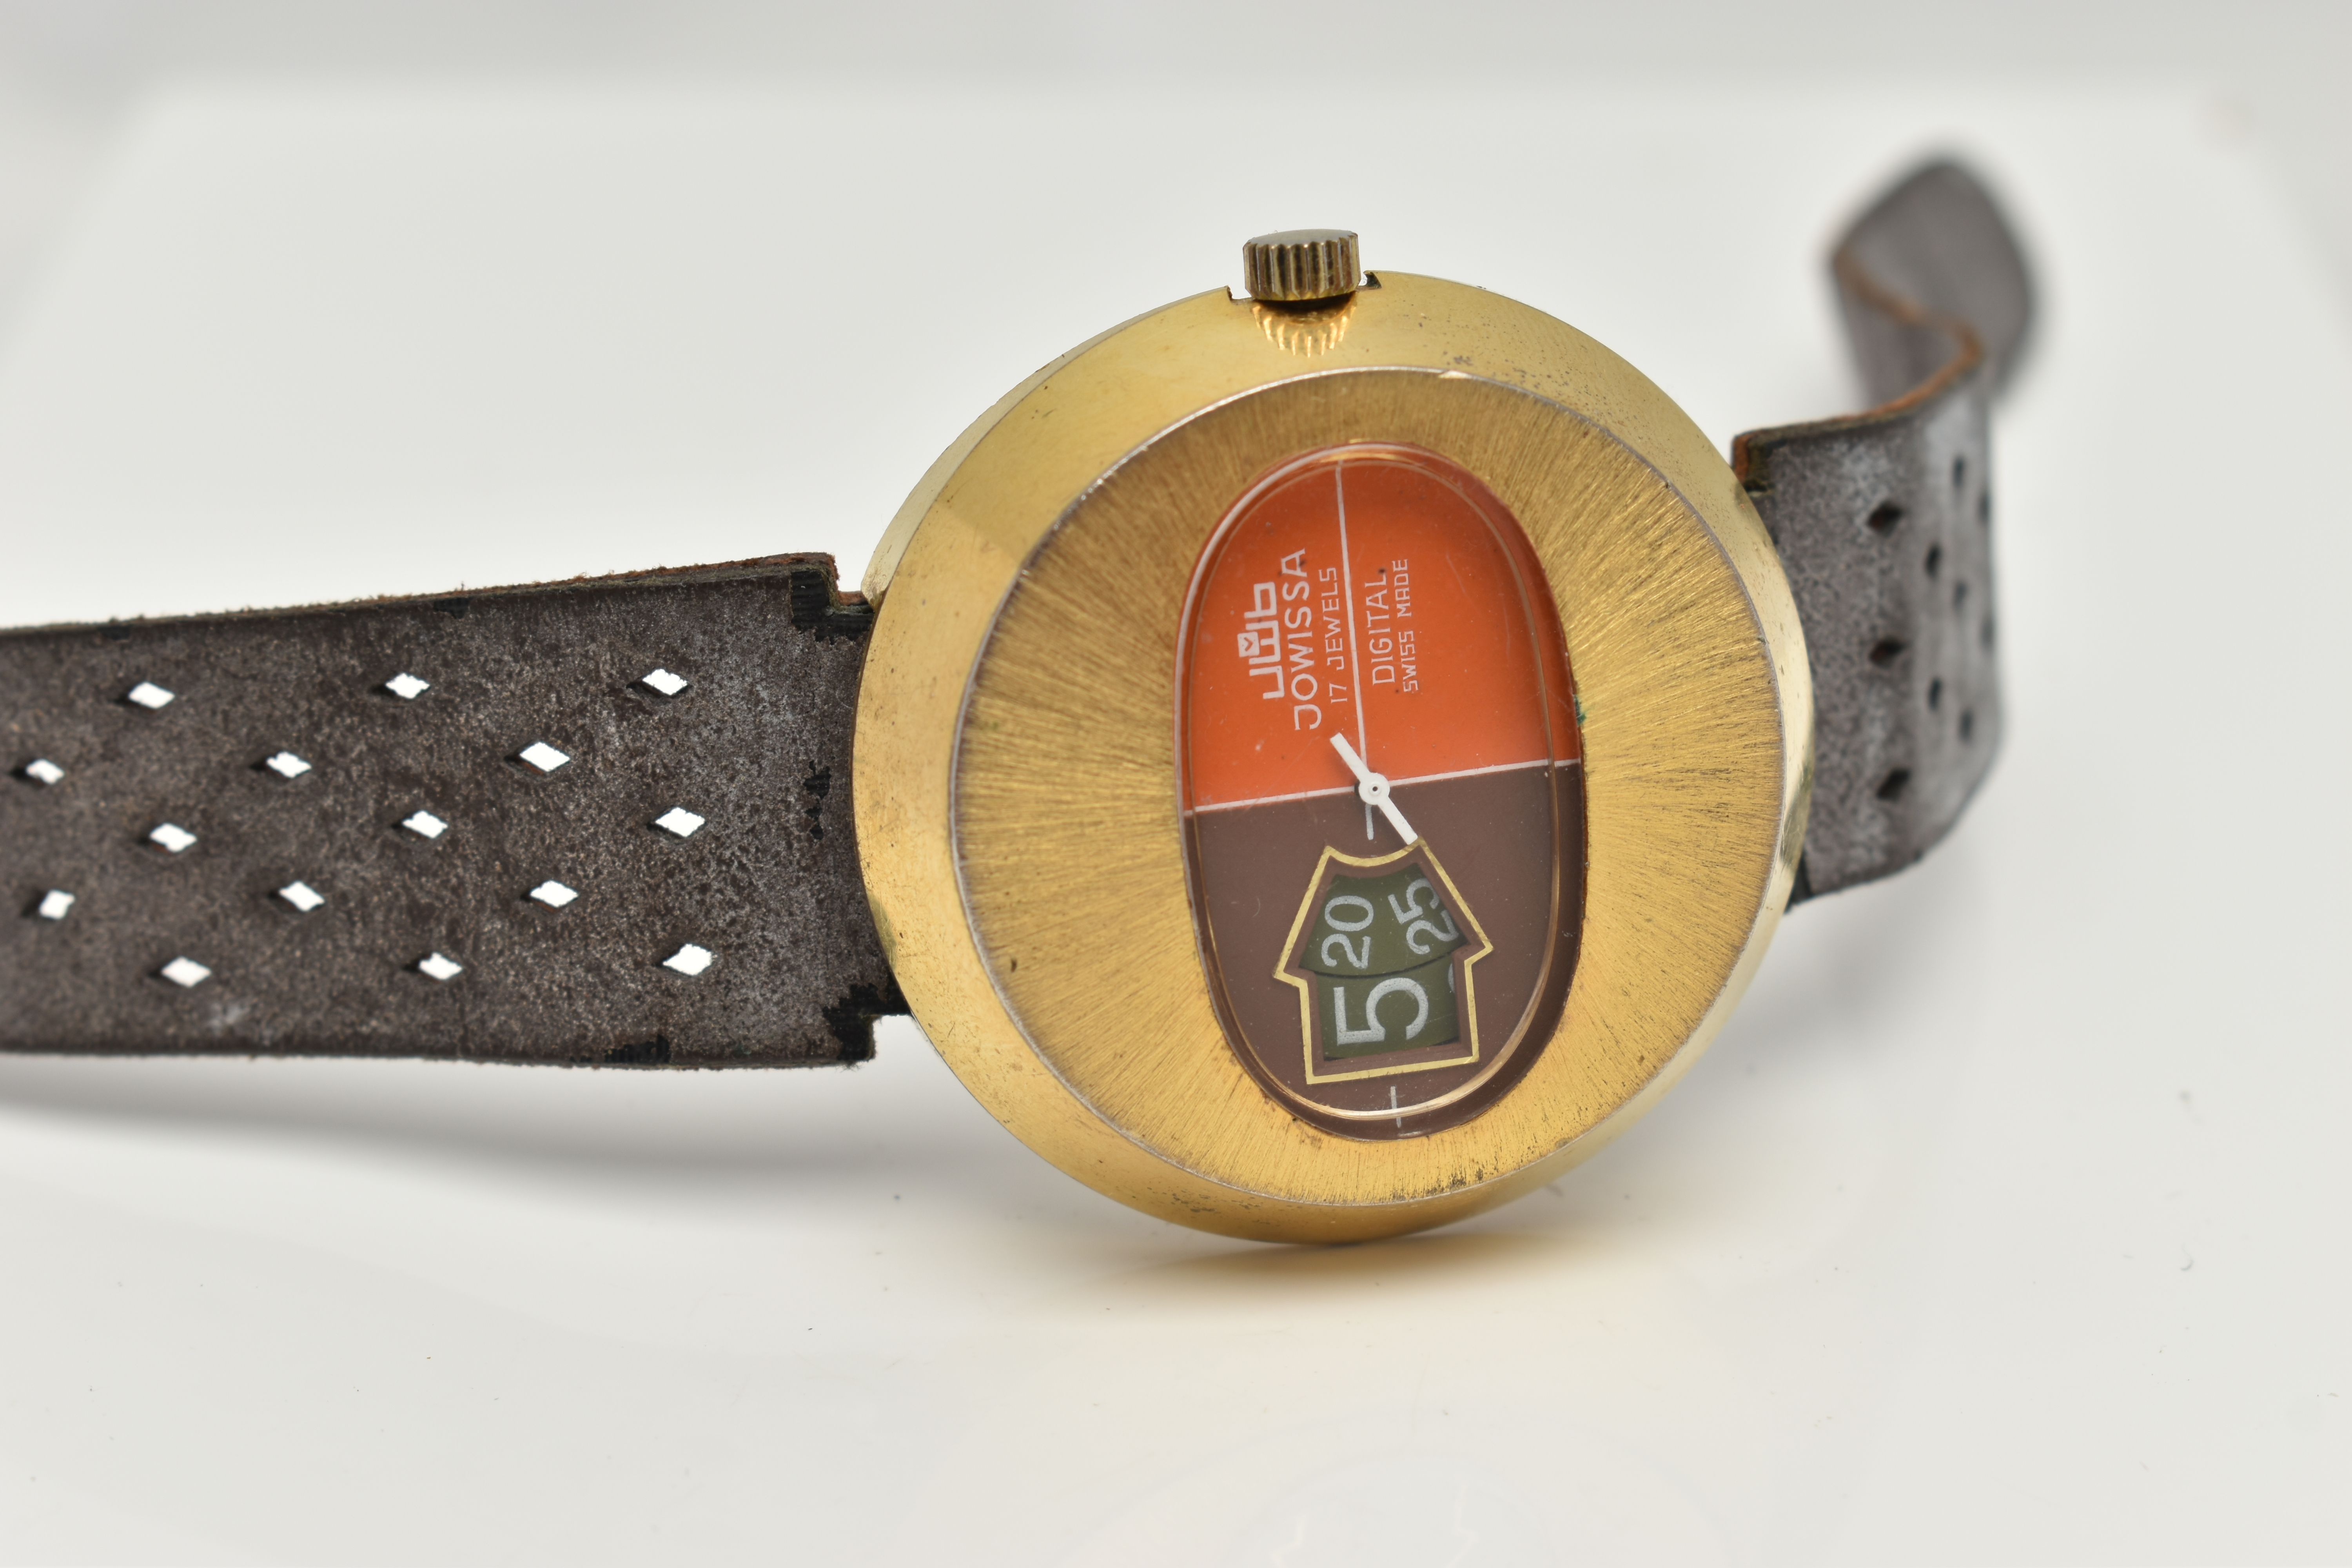 A VINTAGE JOWISSA DIGITAL WRISTWATCH, brown and orange dial with white hands, date window, the - Image 4 of 6